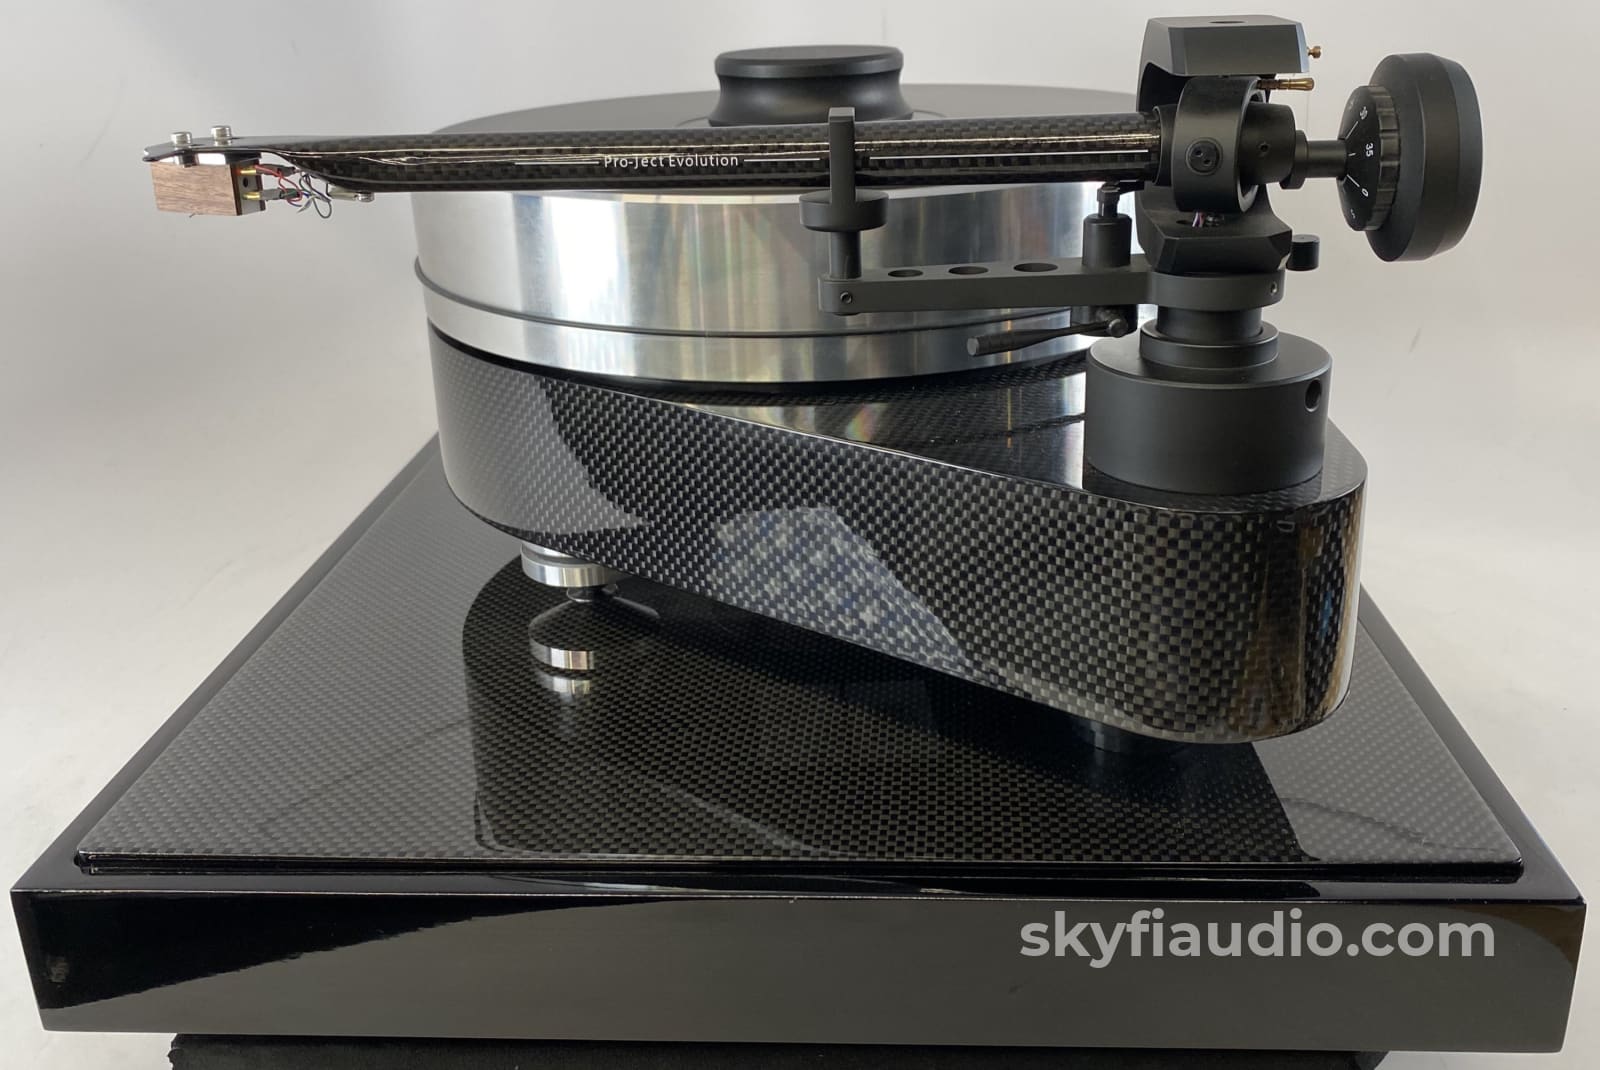 Pro-Ject Rpm 10 Carbon Turntable With Evo Arm And New Sumiko Songbird Cartridge